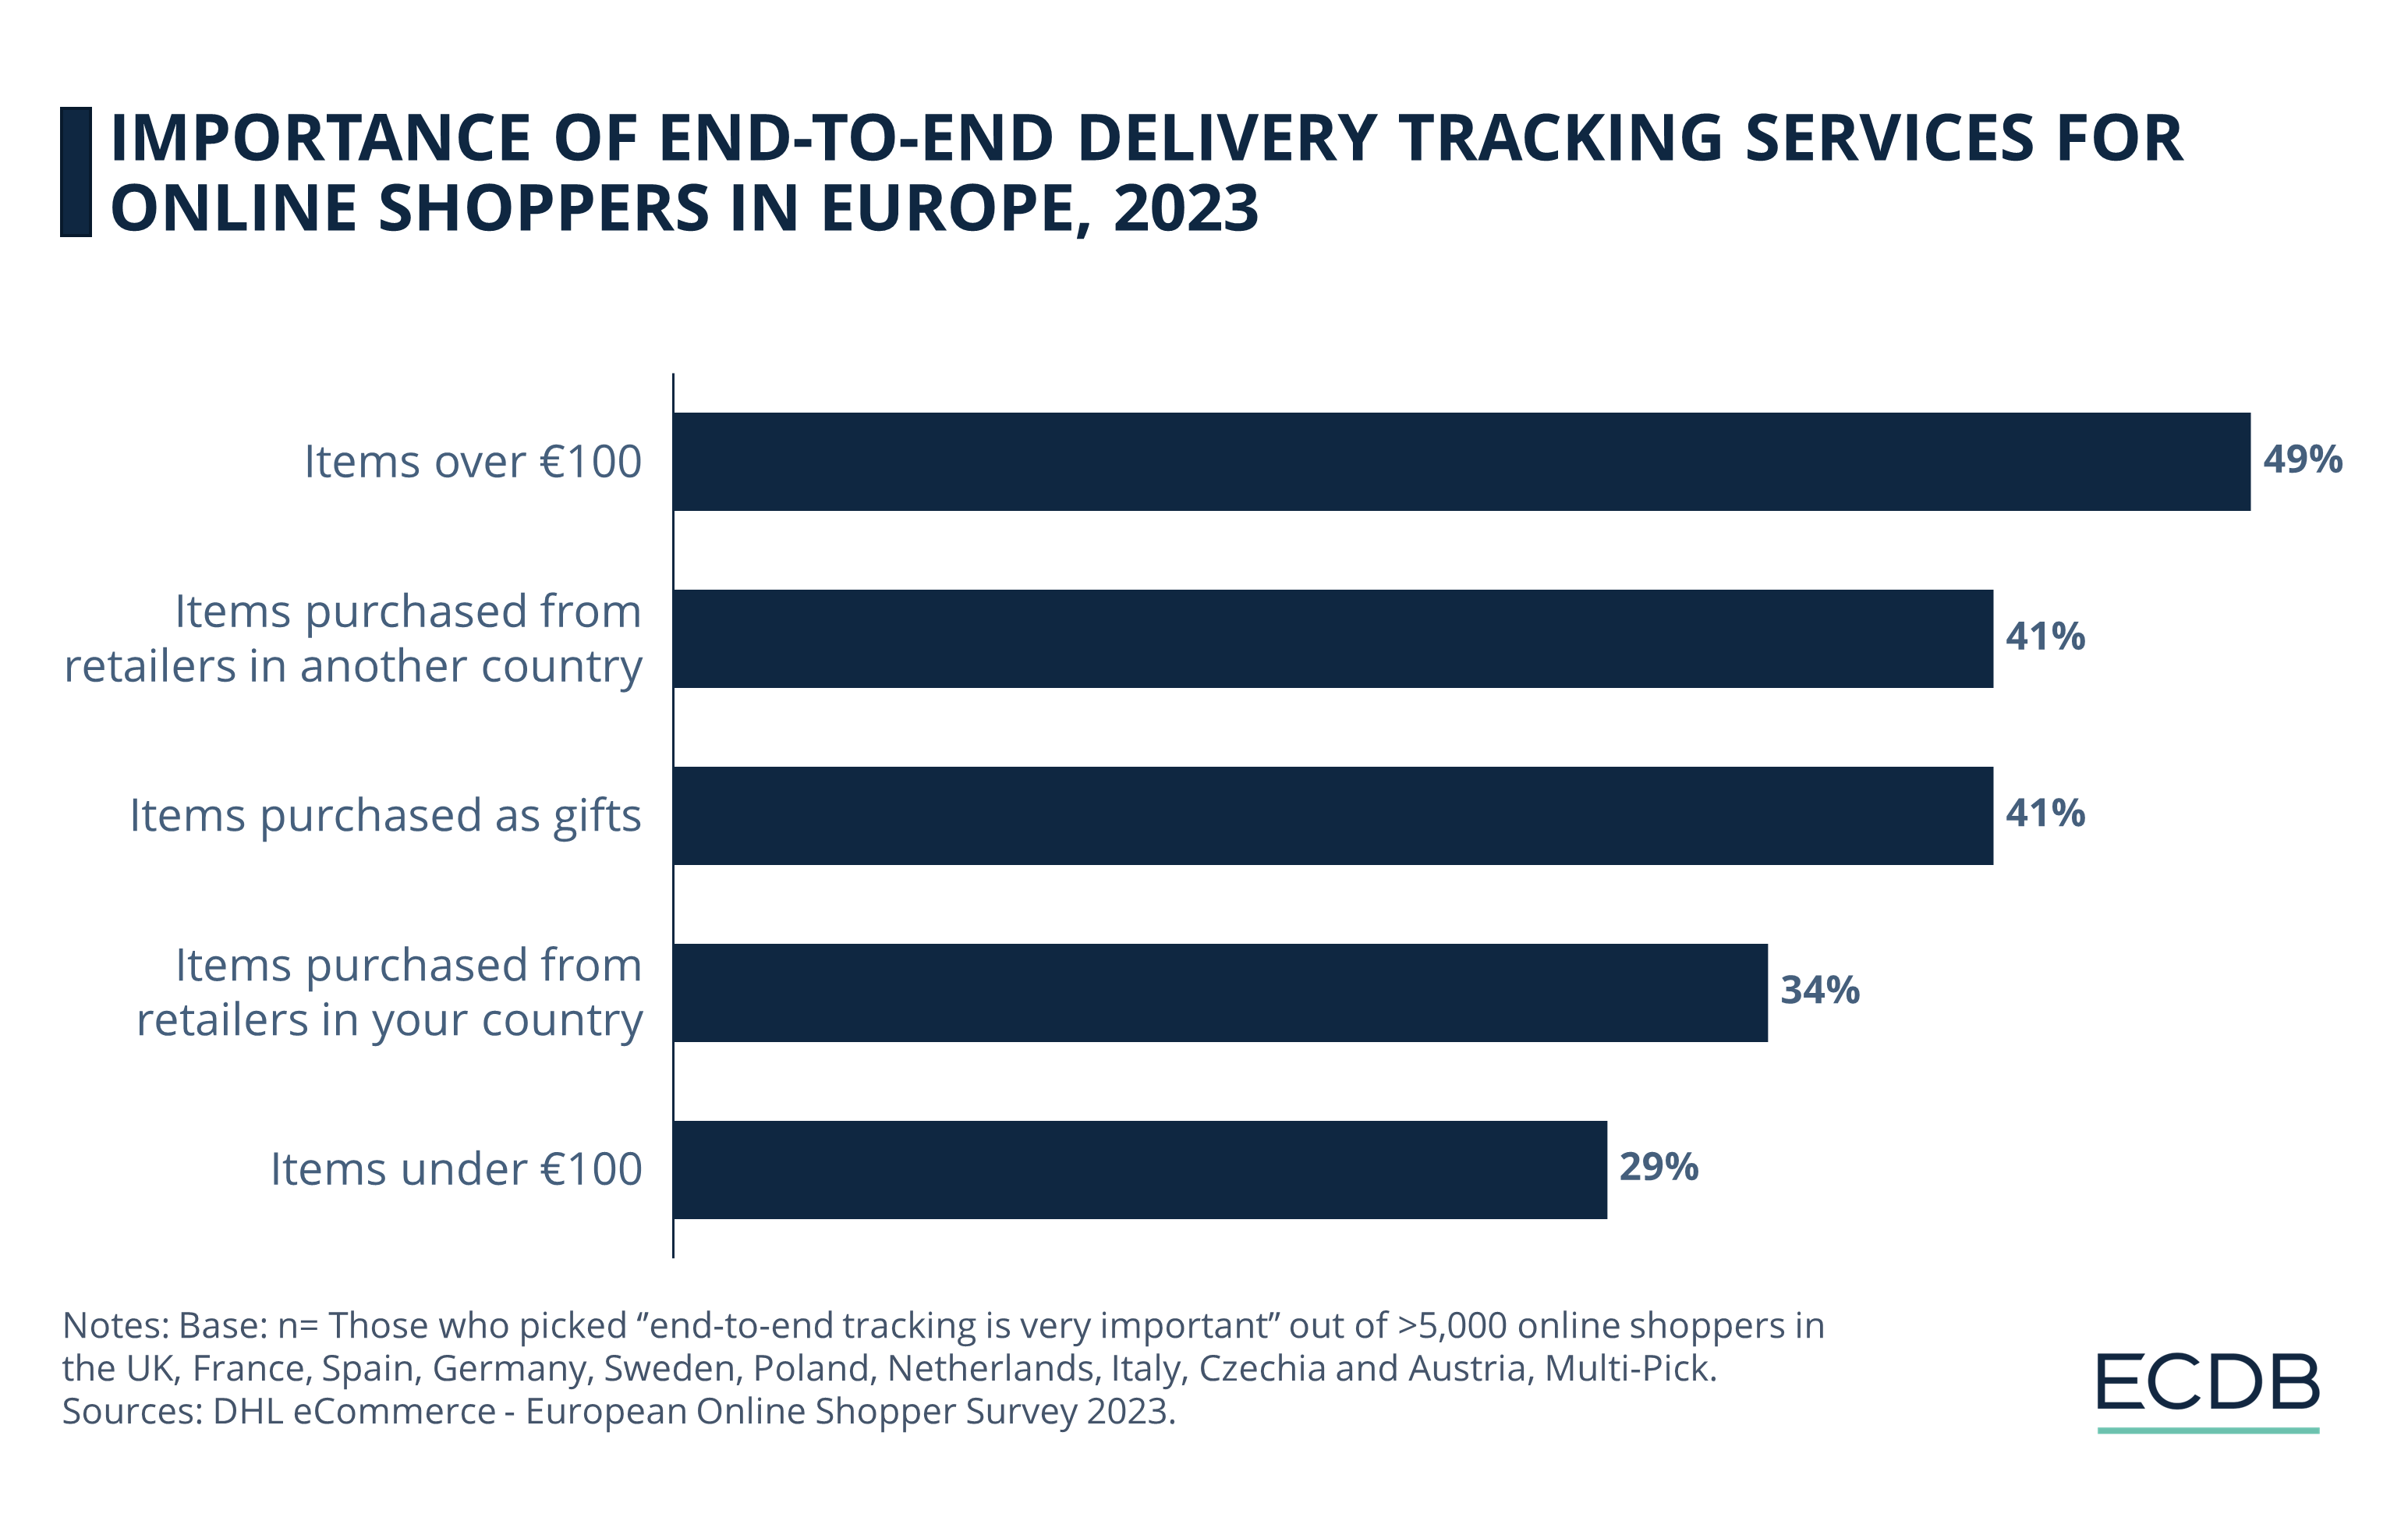 Importance of End-to-End Delivery Tracking Services for Online Shoppers in Europe, 2023